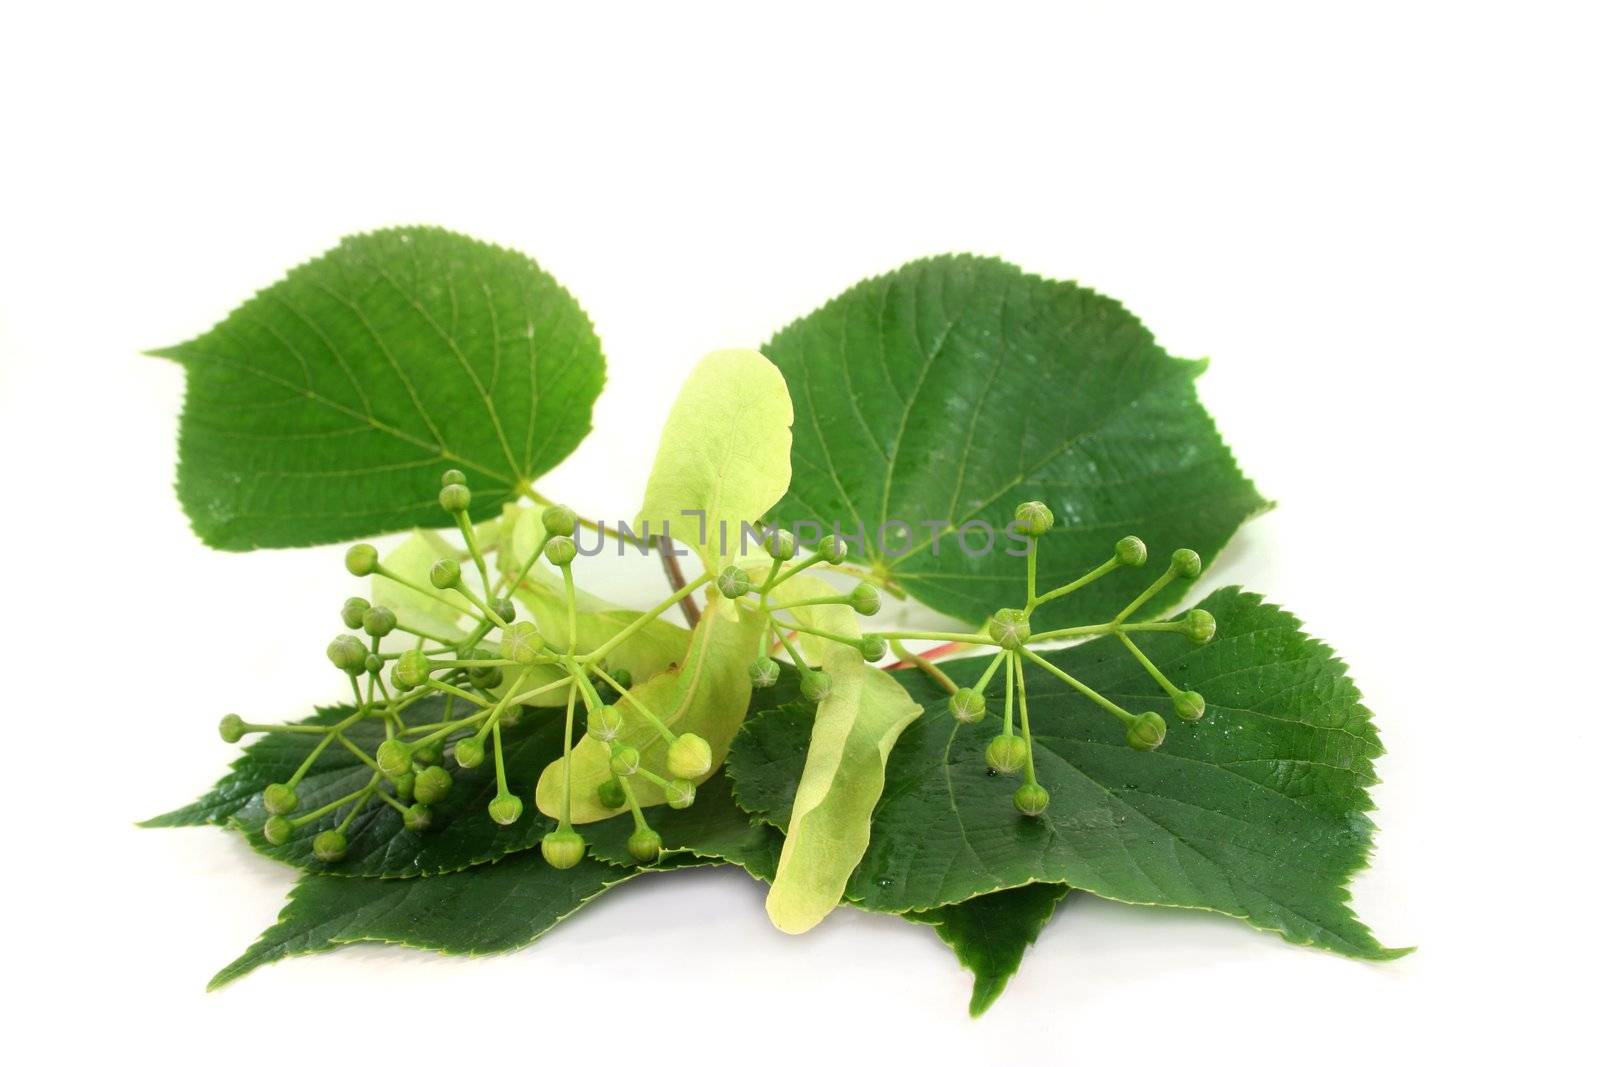 Linden blossom and lime leaves against white background